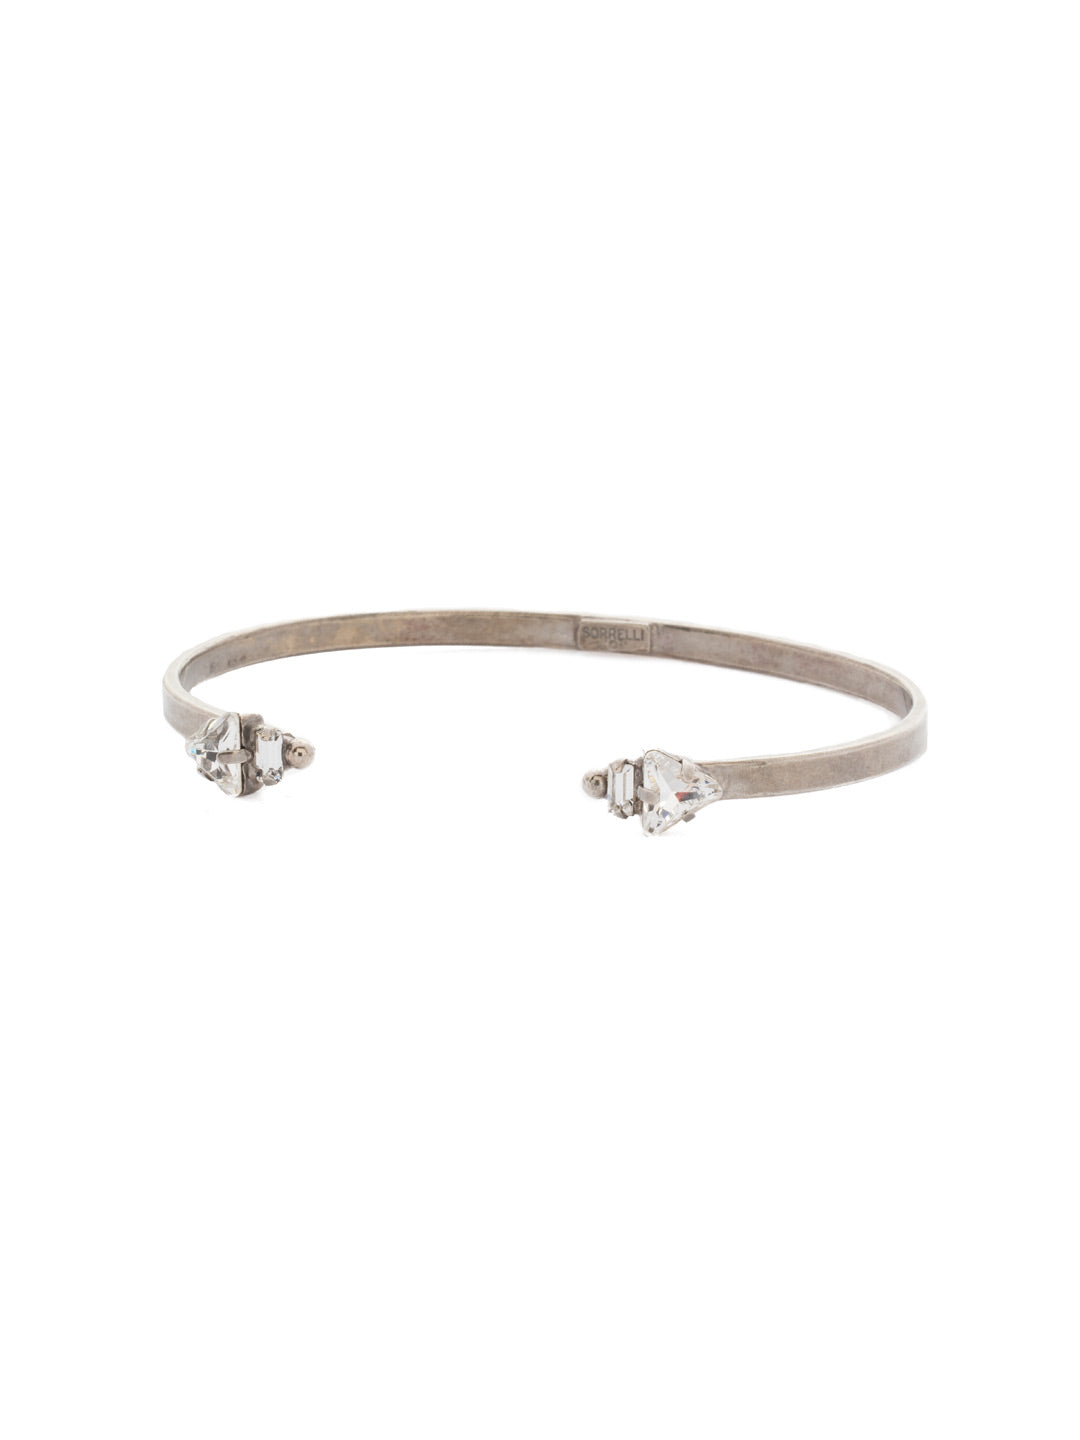 Product Image: Open Ended Cuff Bracelet